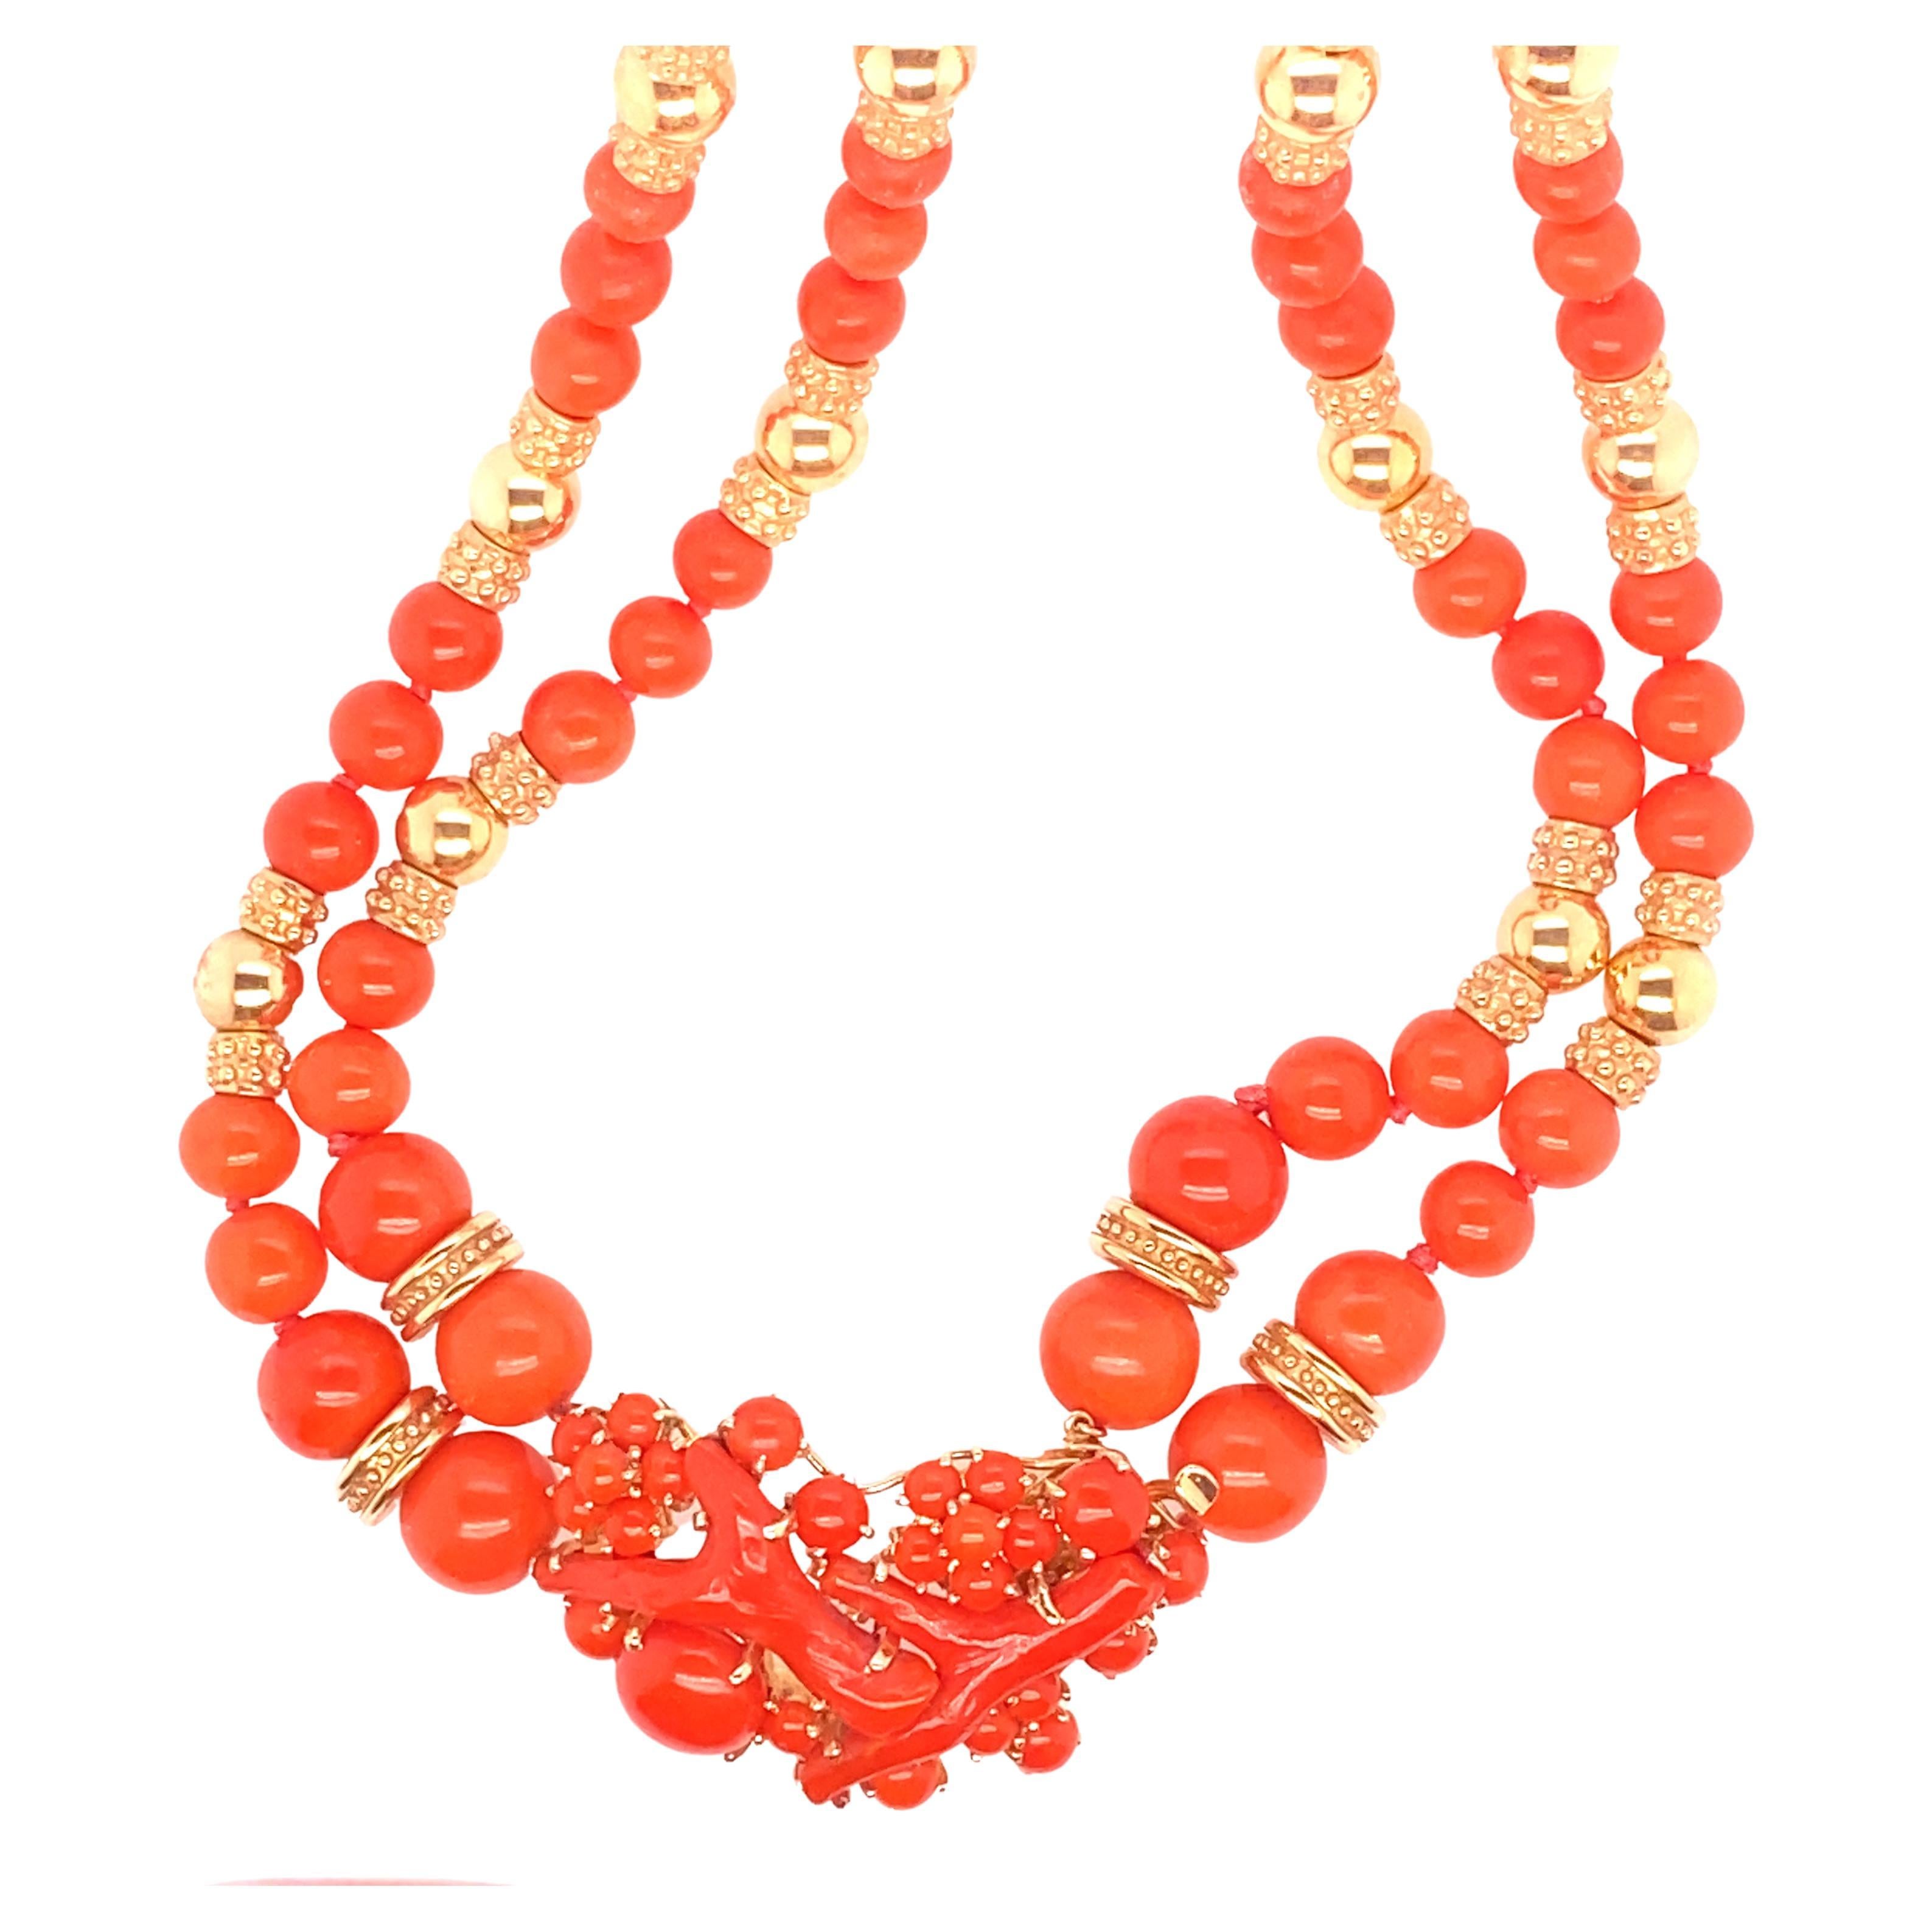 Vintage Italian Coral Bead Necklace with Gold Accents For Sale